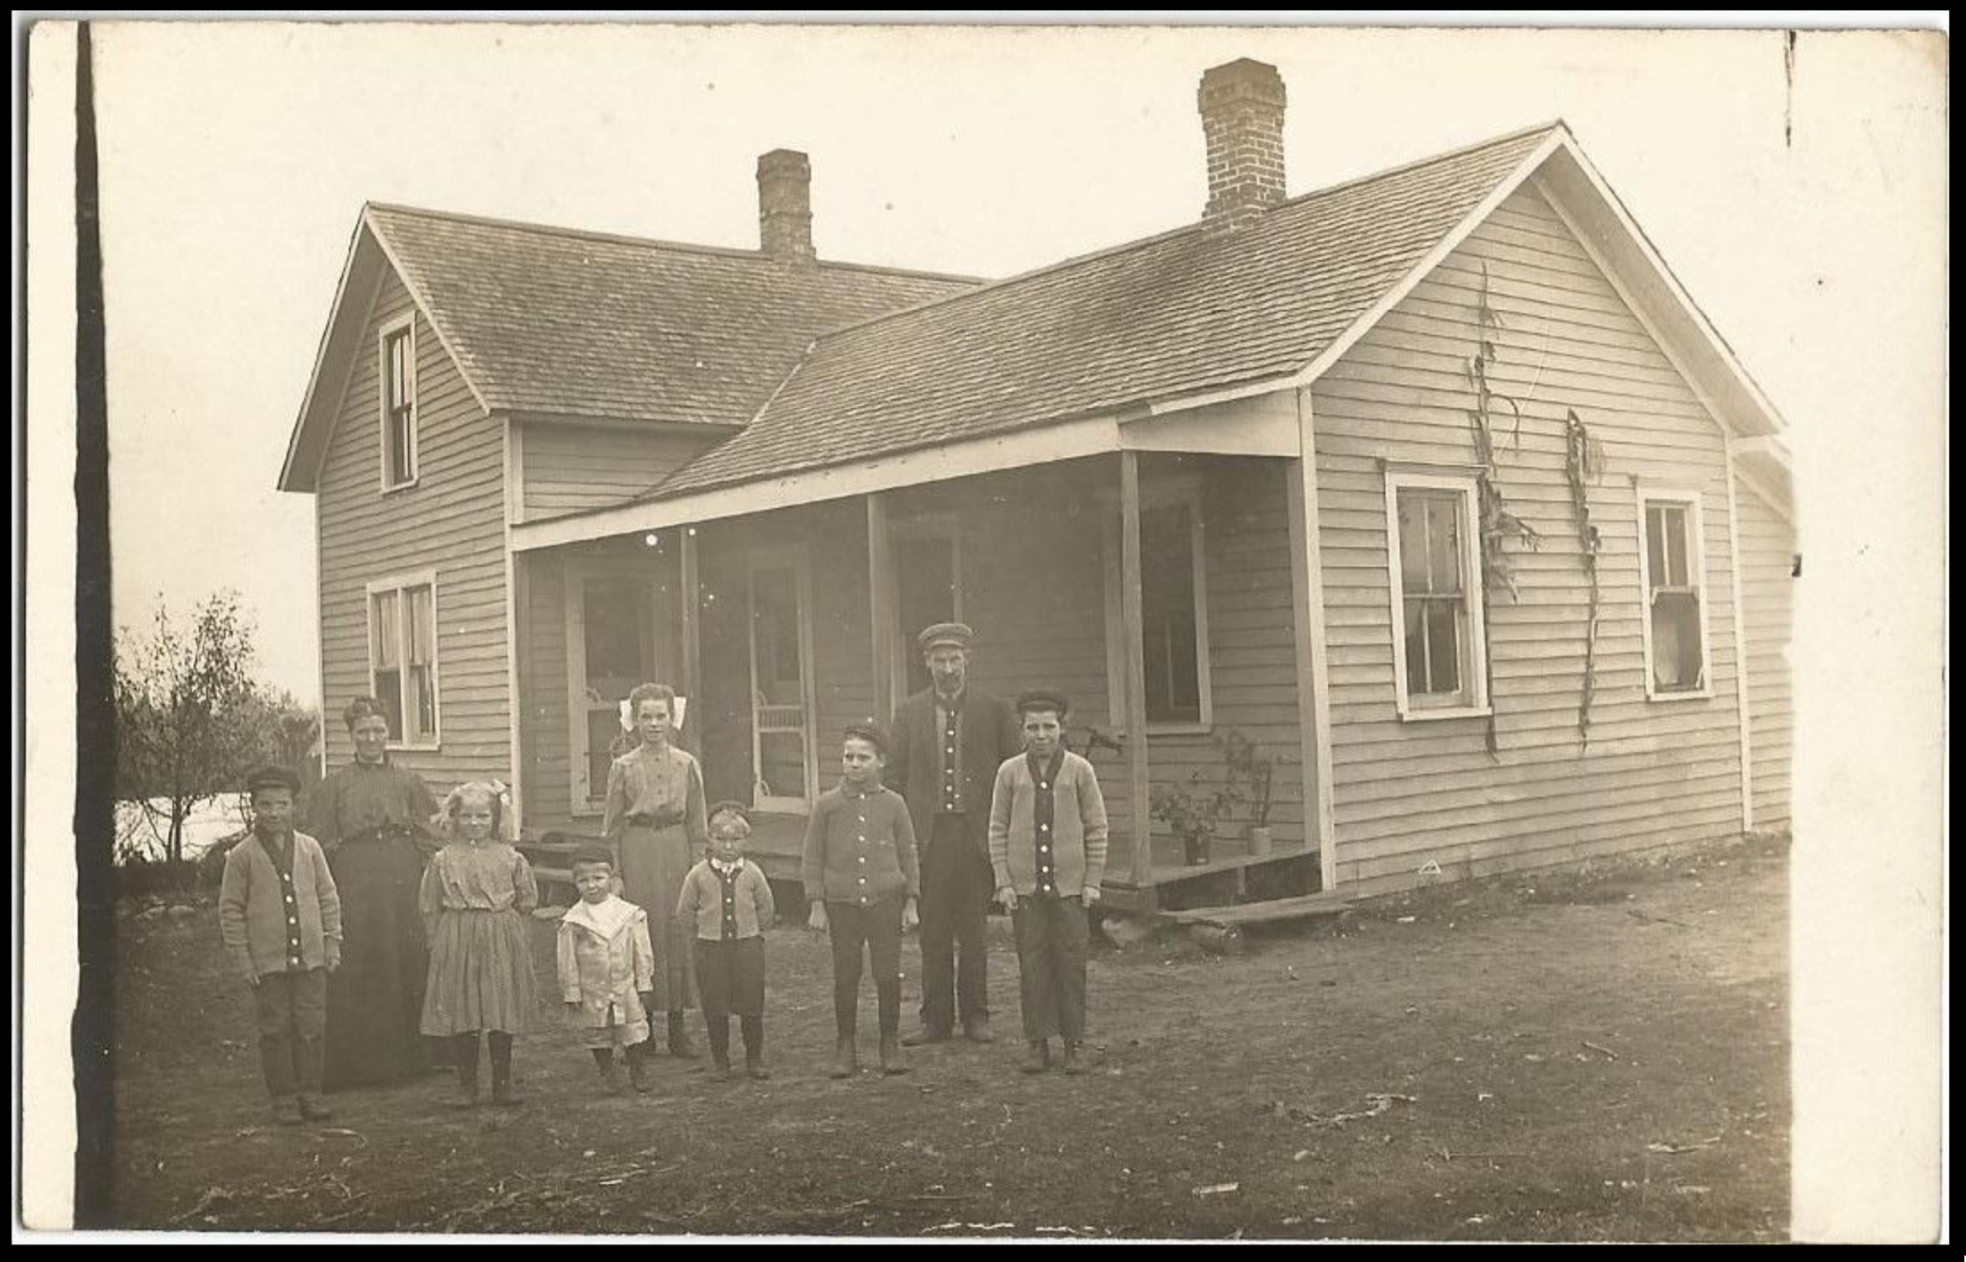 Ogdensburg - Sussex County - Morris Neilson Home and Family - c 1910